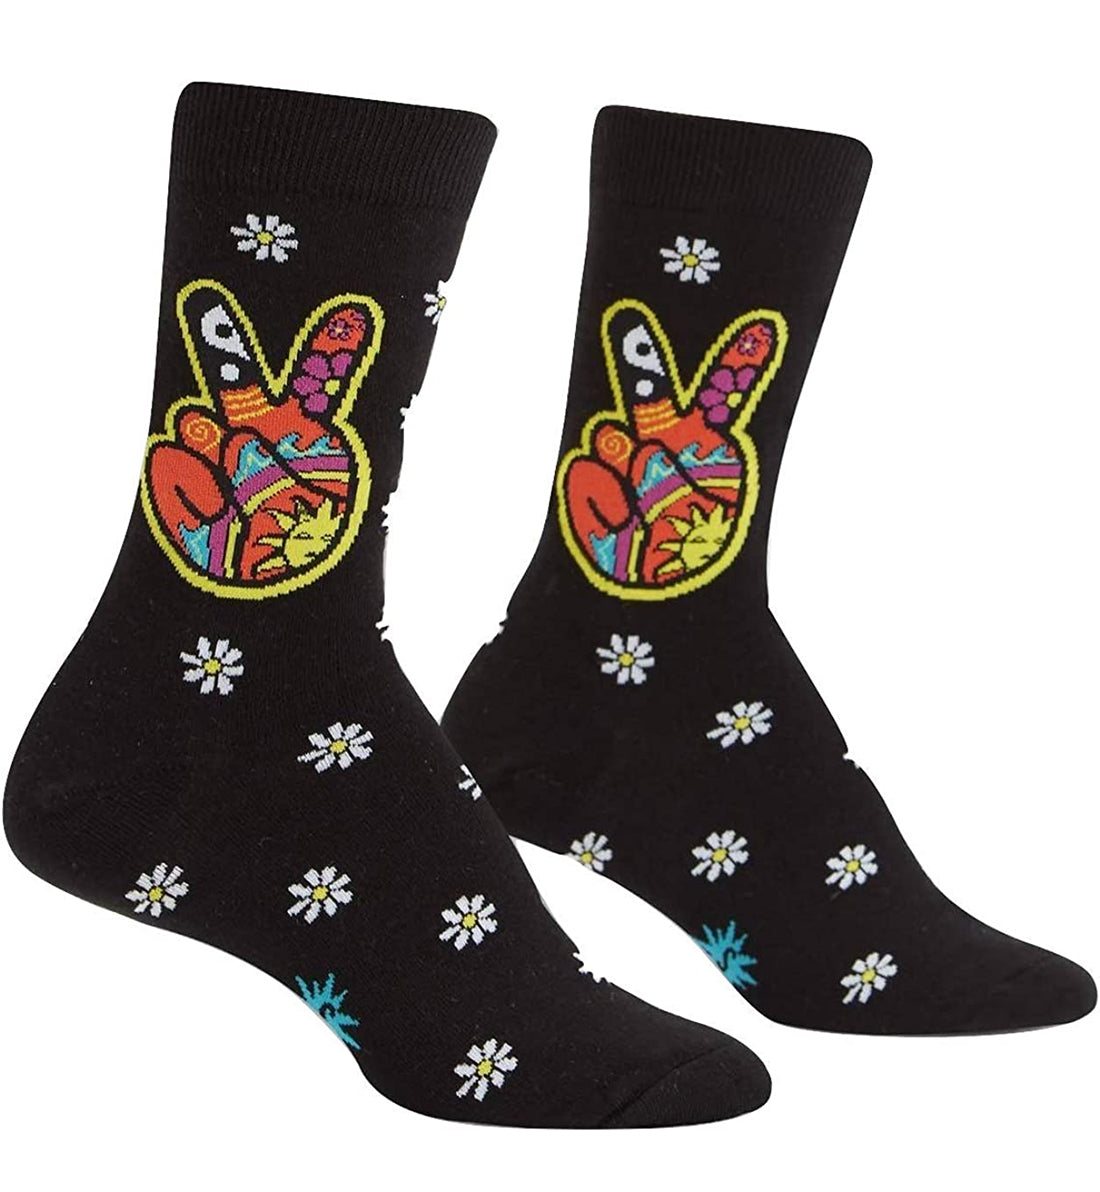 SOCK it to me Women&#39;s Crew Socks (w0202),Dream of the &#39;90s - Dream of the &#39;90s,One Size